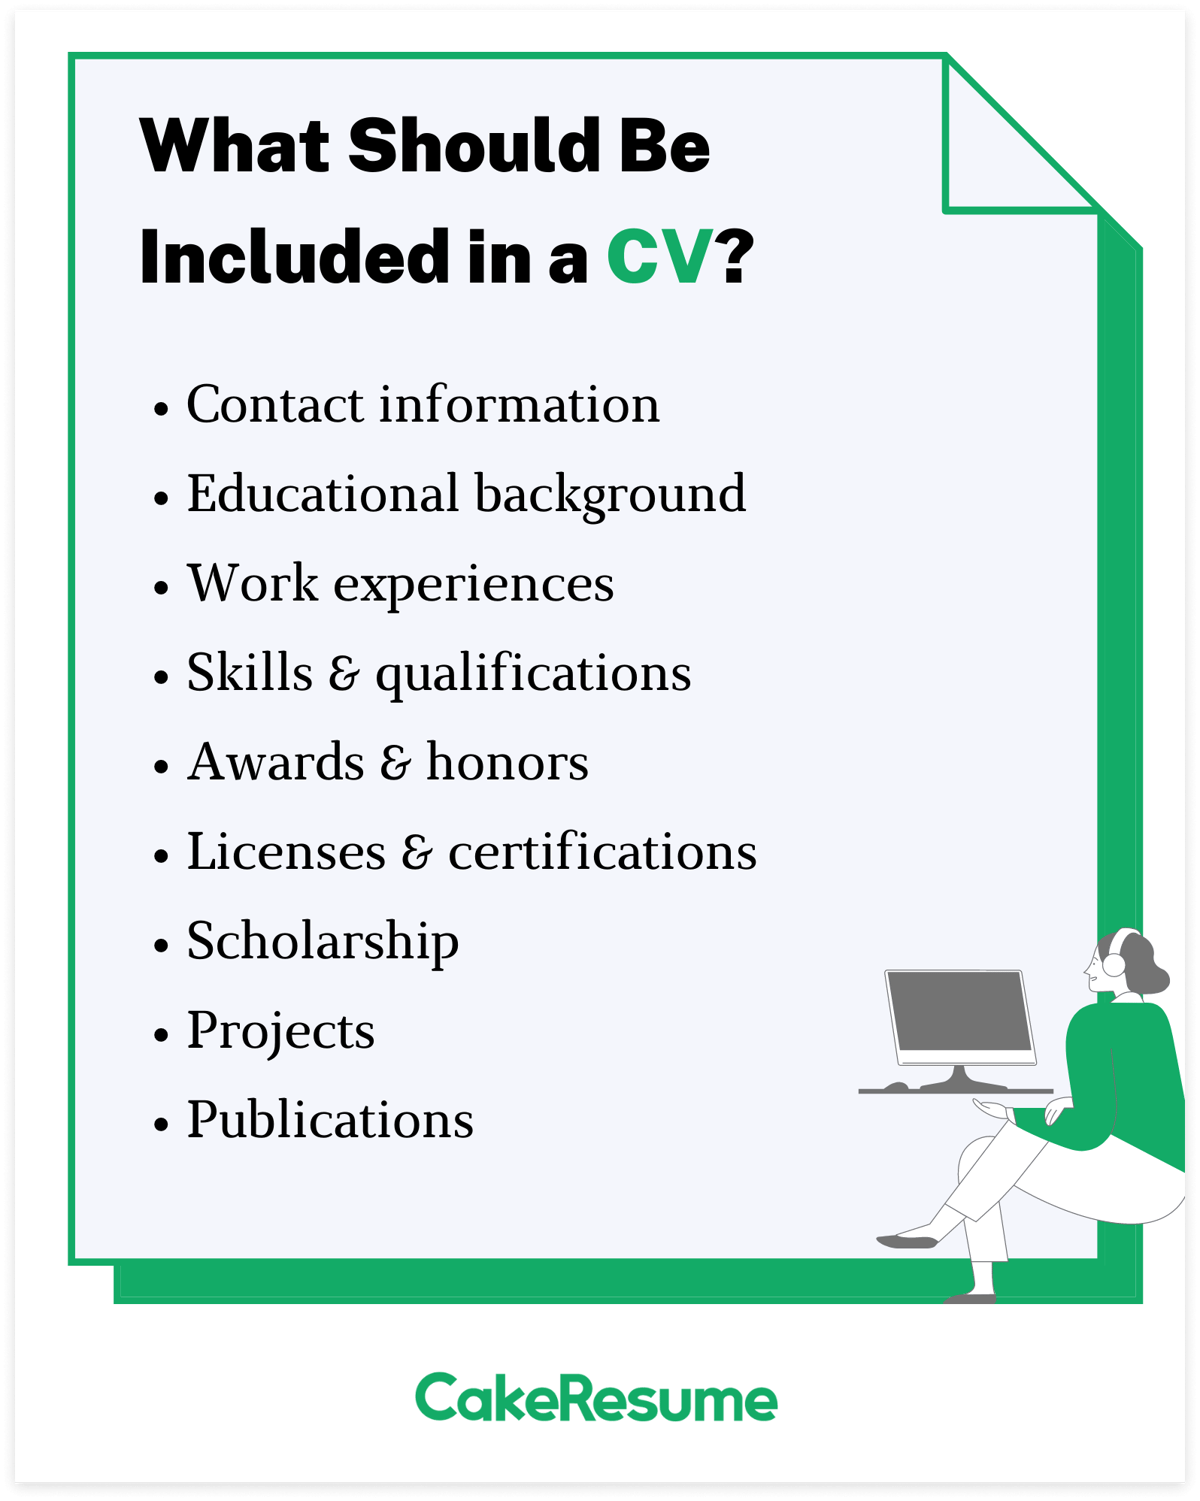 What to include in CV